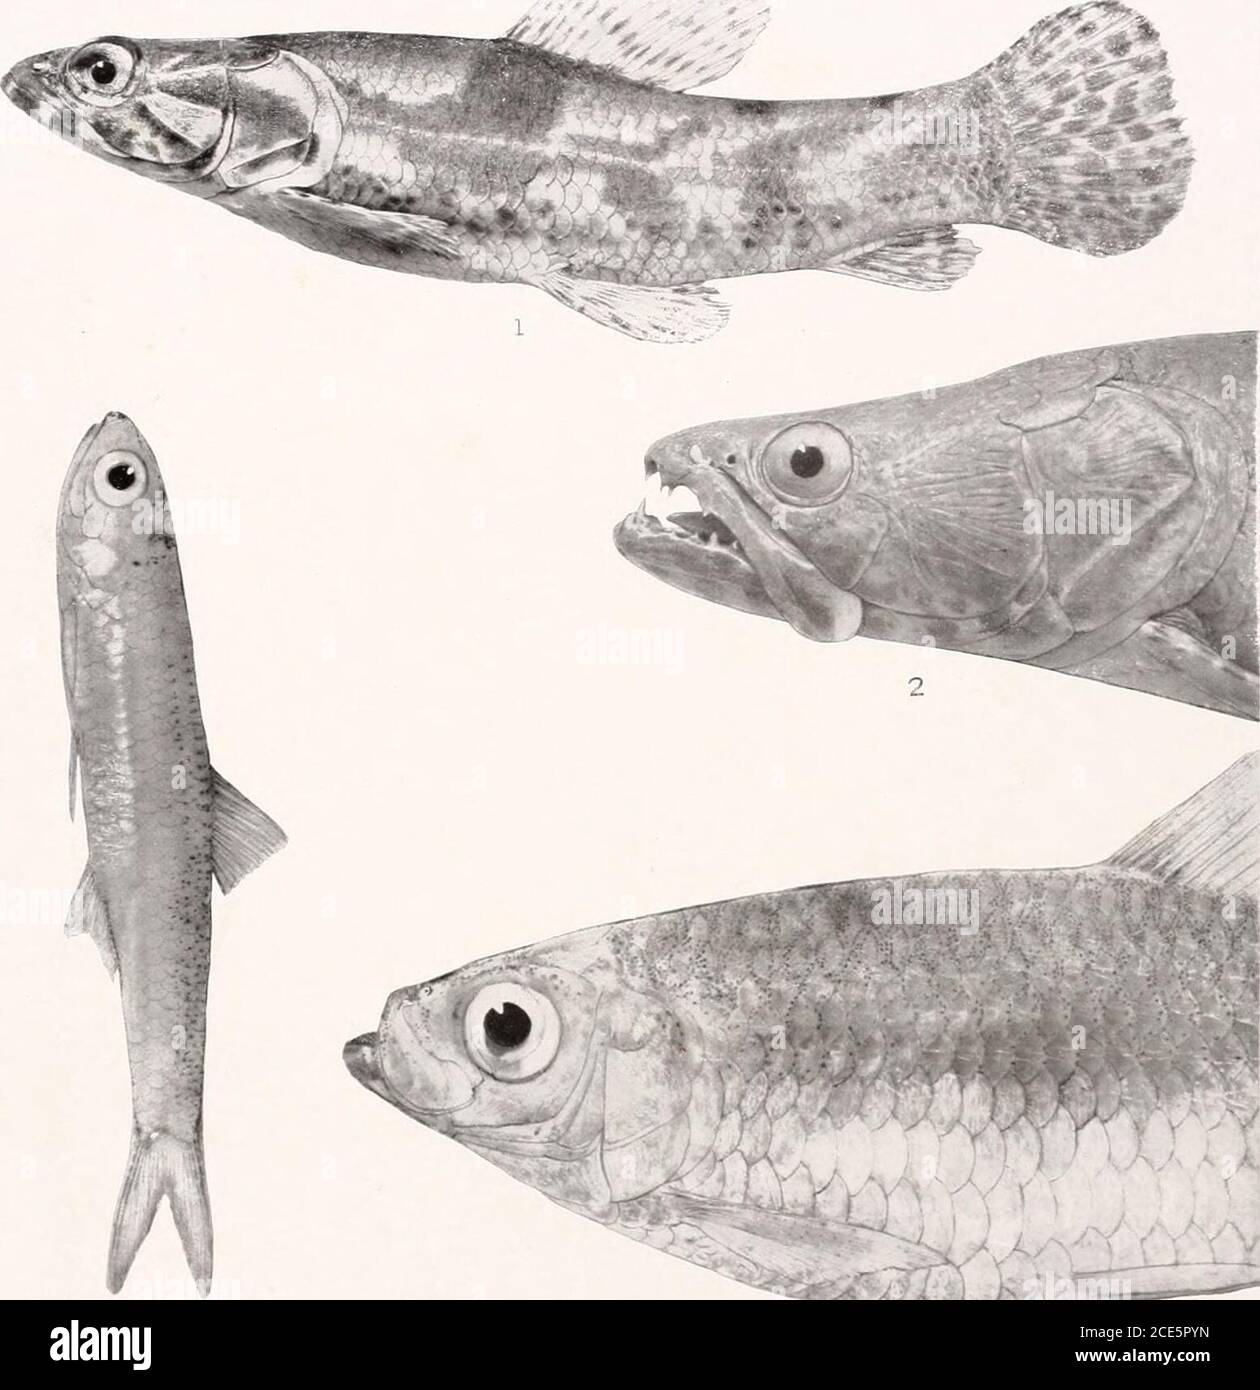 . The freshwater fishes of British Guiana, including a study of the ecological grouping of species and the relation of the fauna of the plateau to that of the lowlands . 1. AcanthocharaxmicrolepisEigenmann. (Type.) 105mm. No.2138. 2. HeterockaraxmacrolepisEiGES-mann. (Type 46 mm. o.2142. 3. Acestrarhynchus falcatus(Bi/OCH). L79 mm. No. 1960. 4. Acestro-rhynchus nasutvs Eigenmann. (Type.) 79 nun. No. 1959, Memoirs Carnegie Museum, Vol. V. Plate La 11. ;. /?&lt; Stock Photo